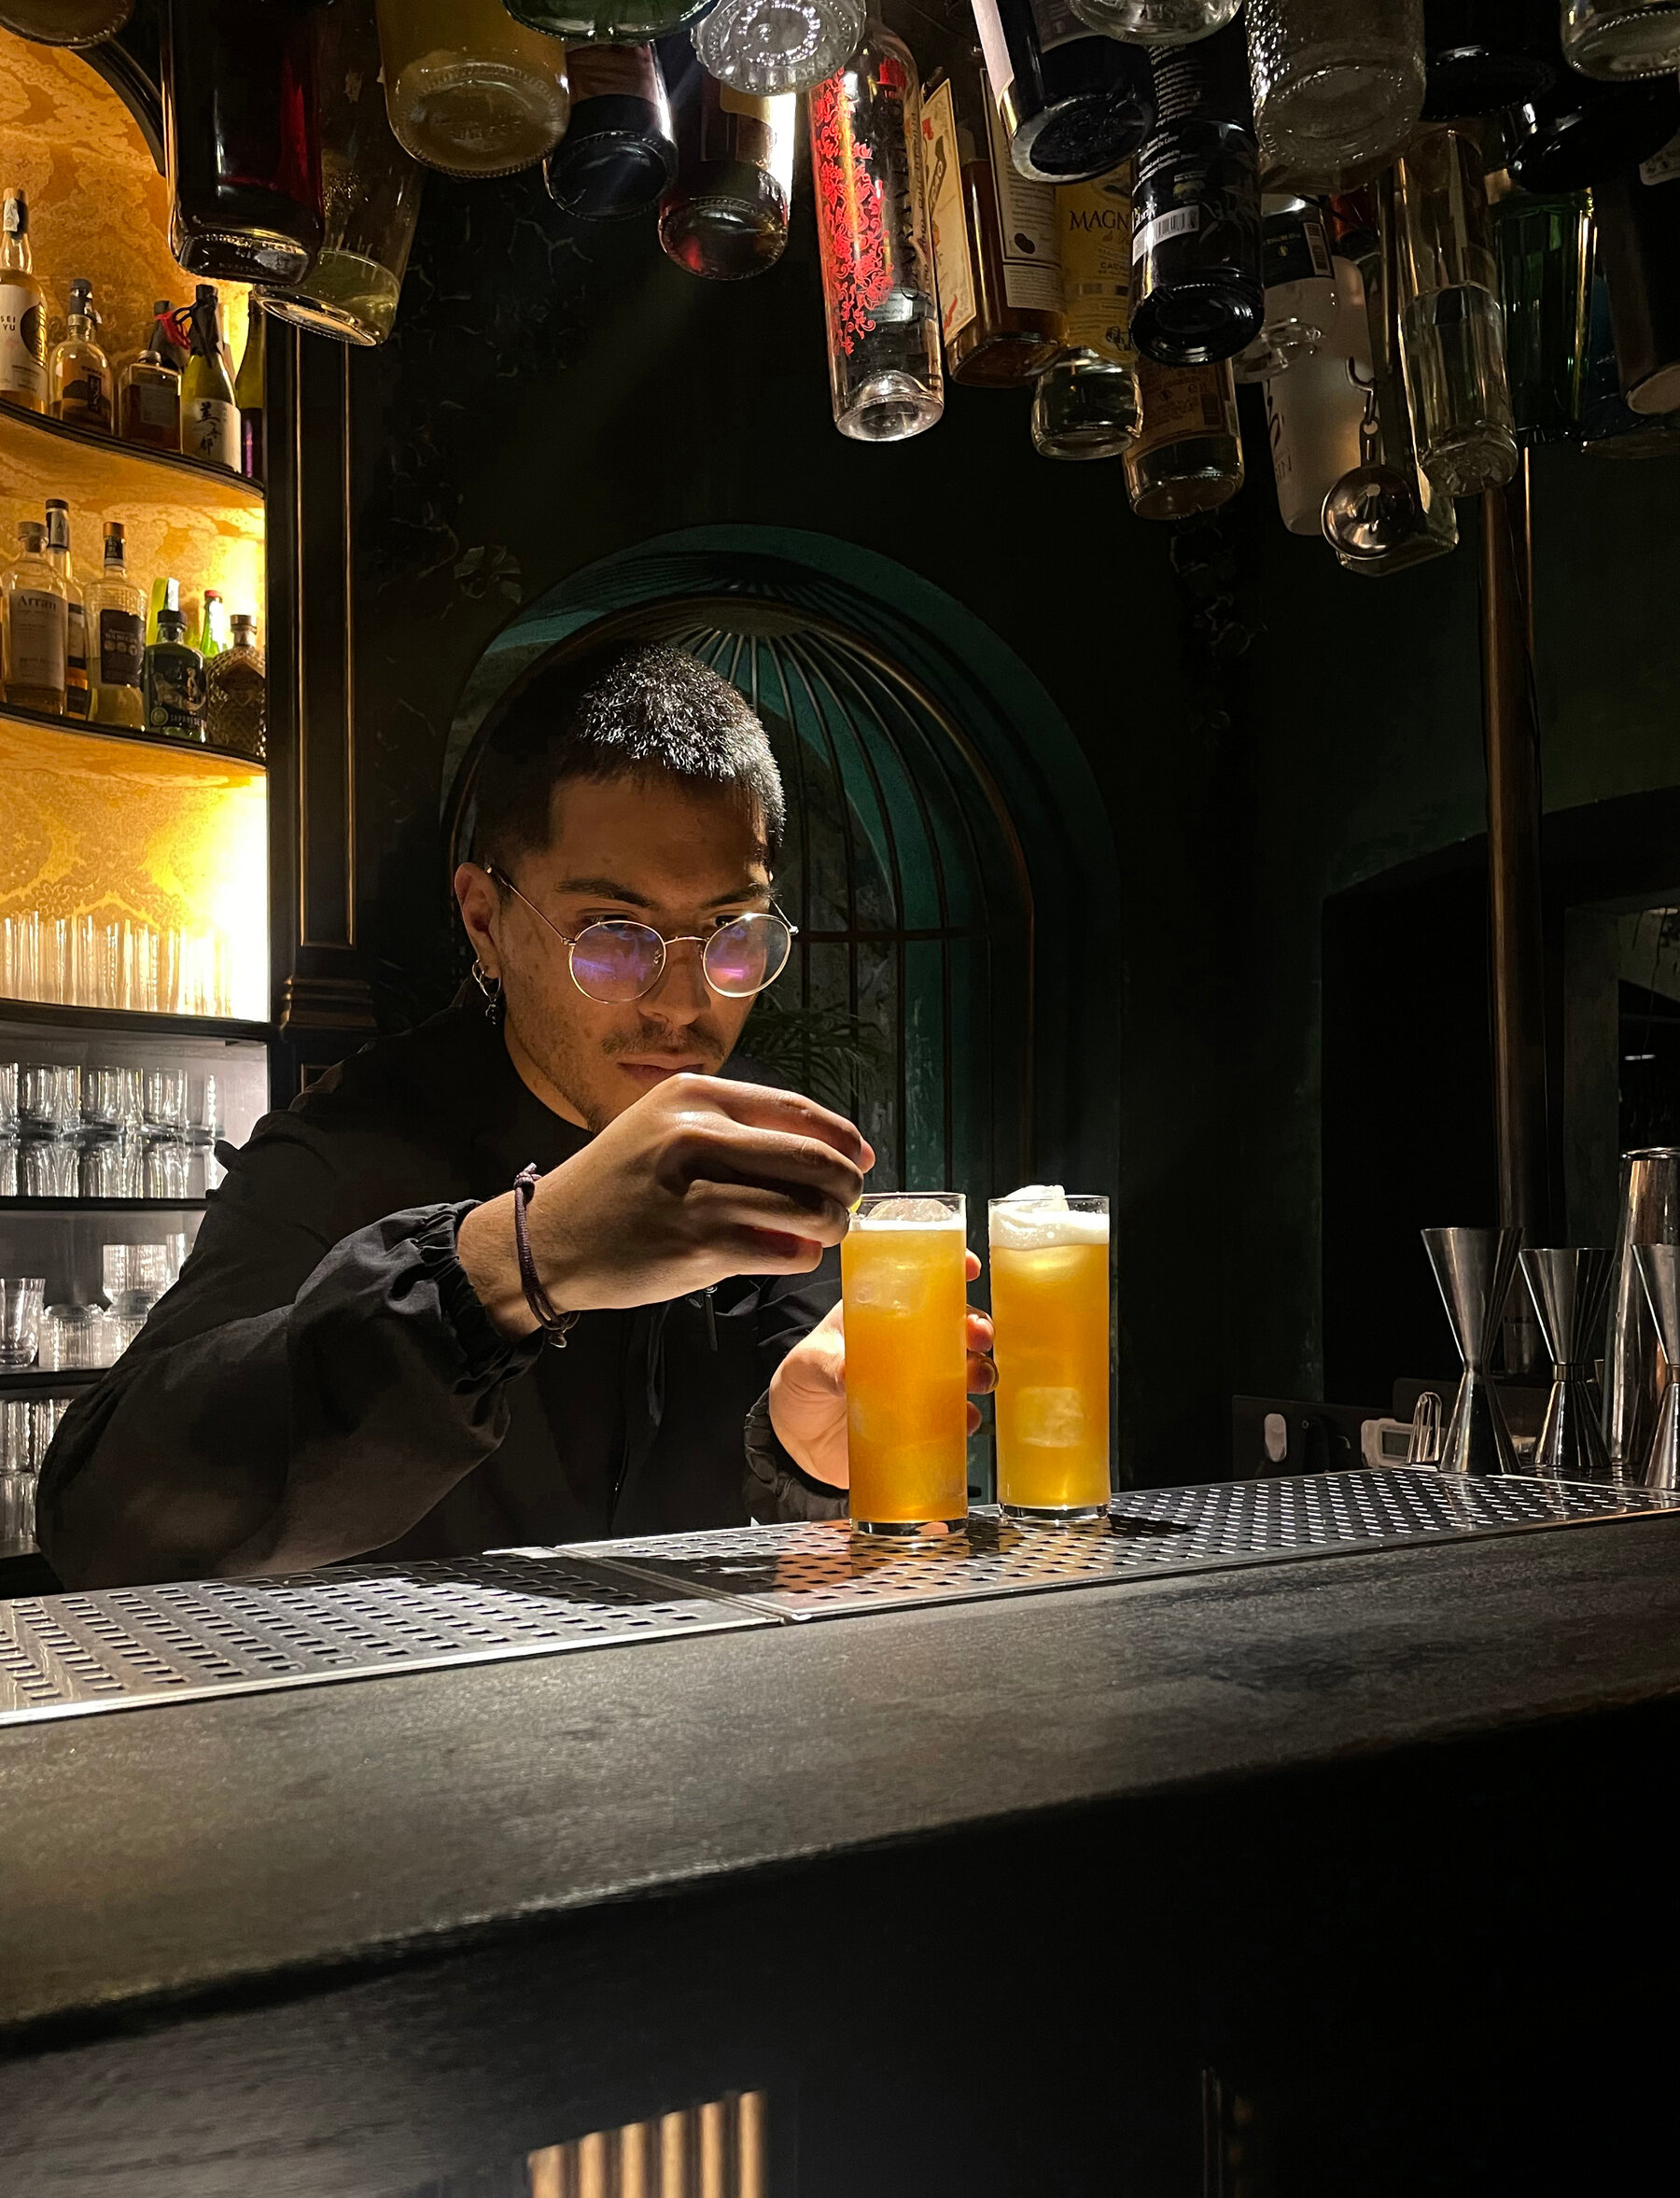 A person with round spectacles makes two drinks in highball glasses from behind a black bar top. Liquor bottles hang above the person. 